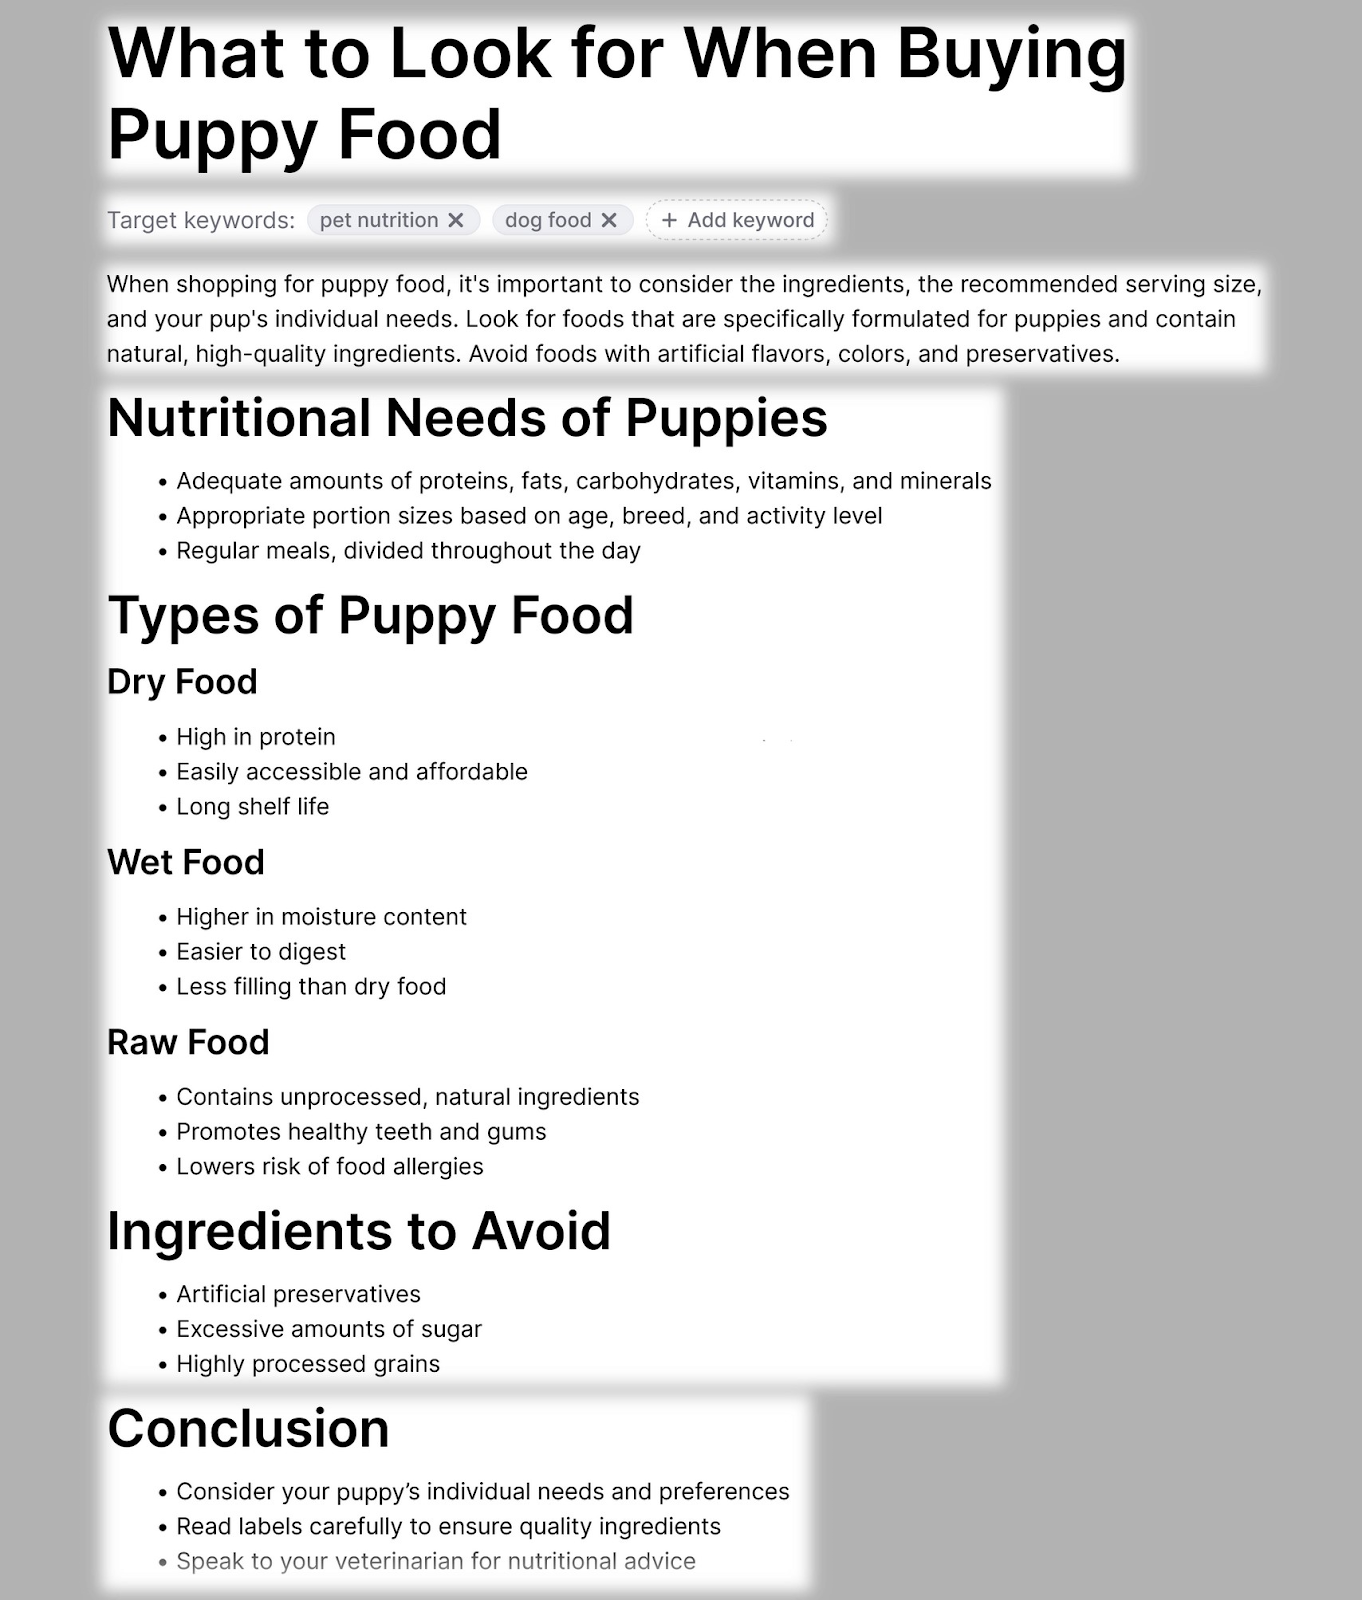 example of a detailed article outline for "What to Look for When Buying Puppy Food"